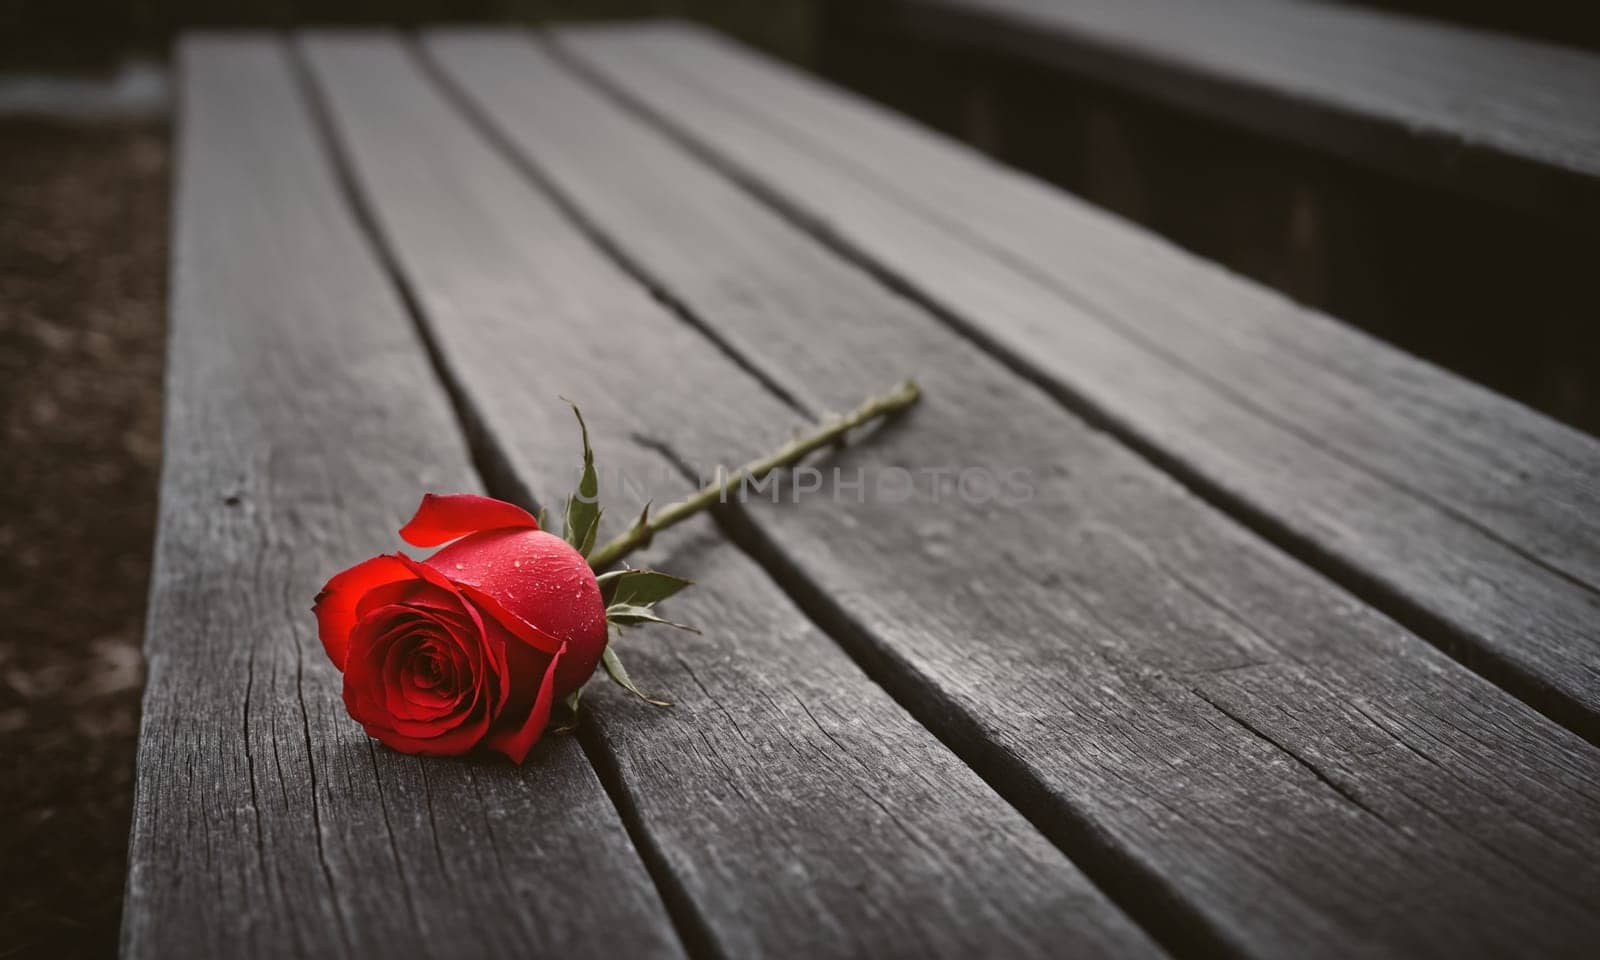 A photo of a single red rose lies gently on a weathered wooden bench, its velvety petals spread wide against the aged grain of the wood